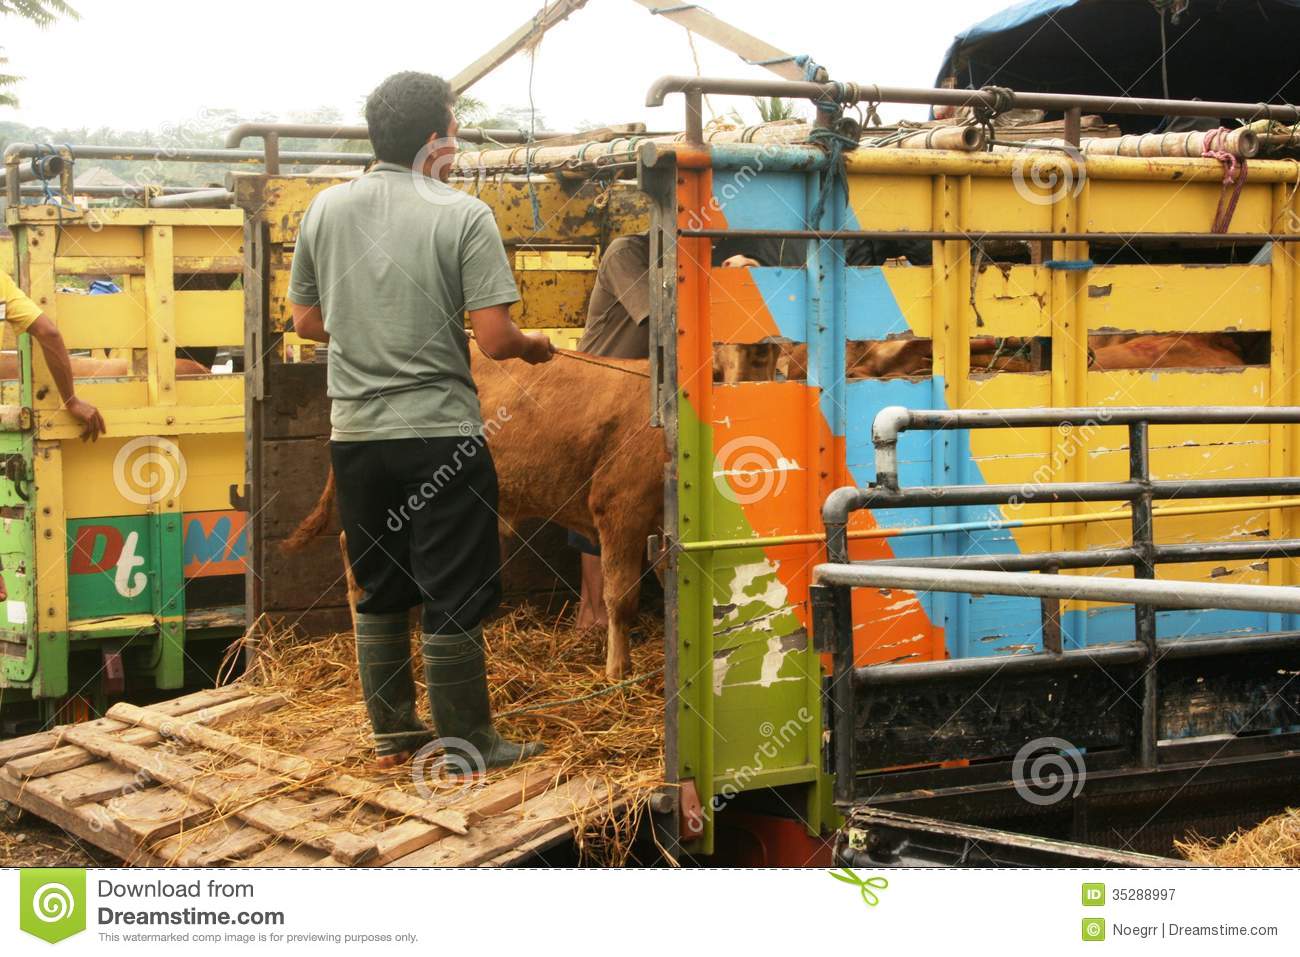 Cattle Market Editorial Photography   Image  35288997